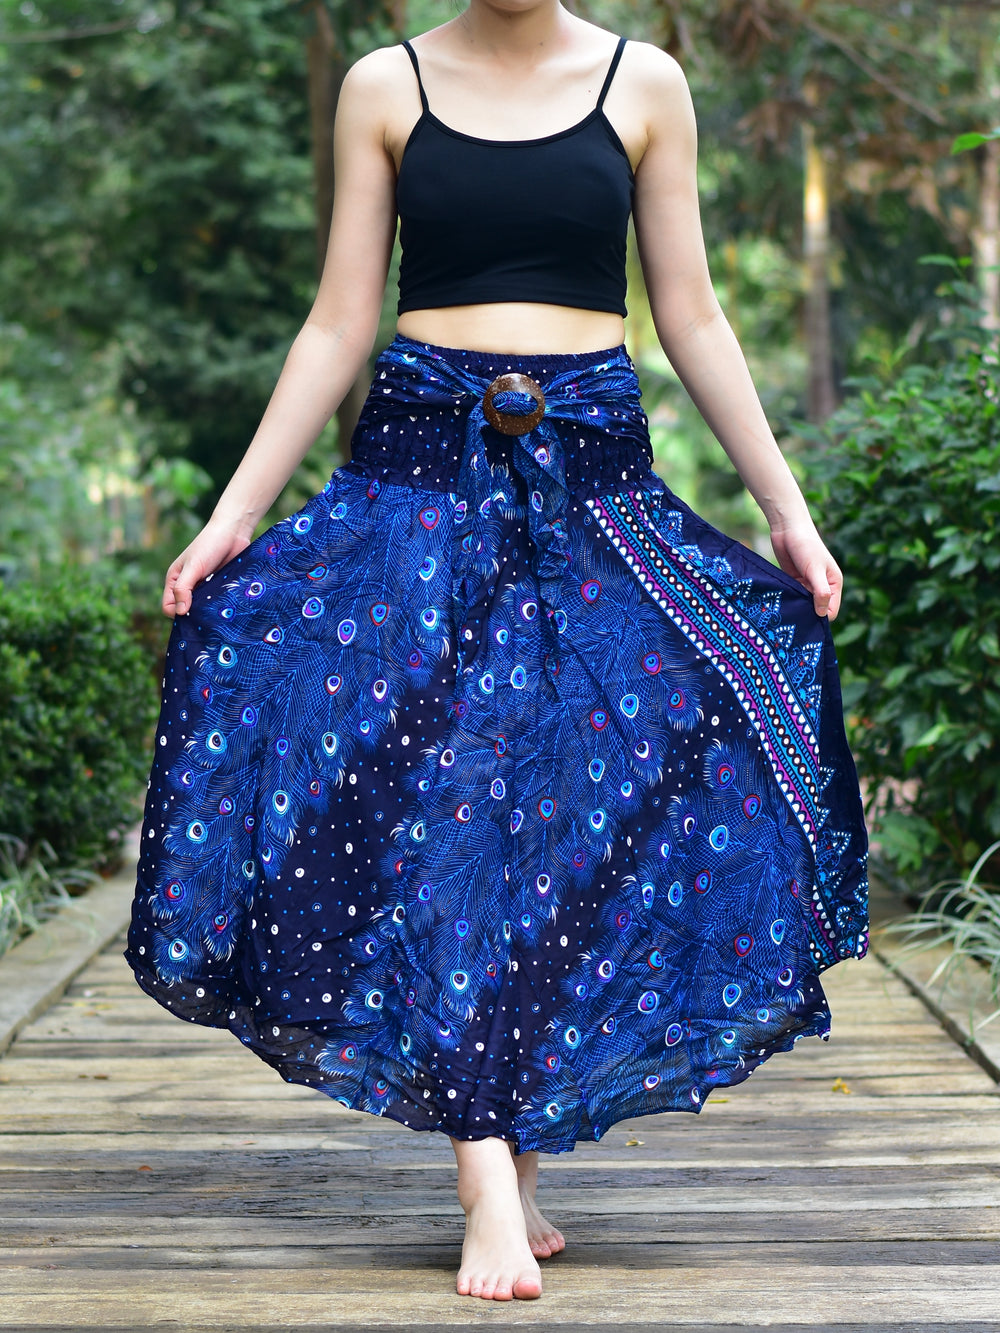 Bohotusk Blue Peacock Long Skirt With Coconut Buckle (& Strapless Dress) S/M to 3XL